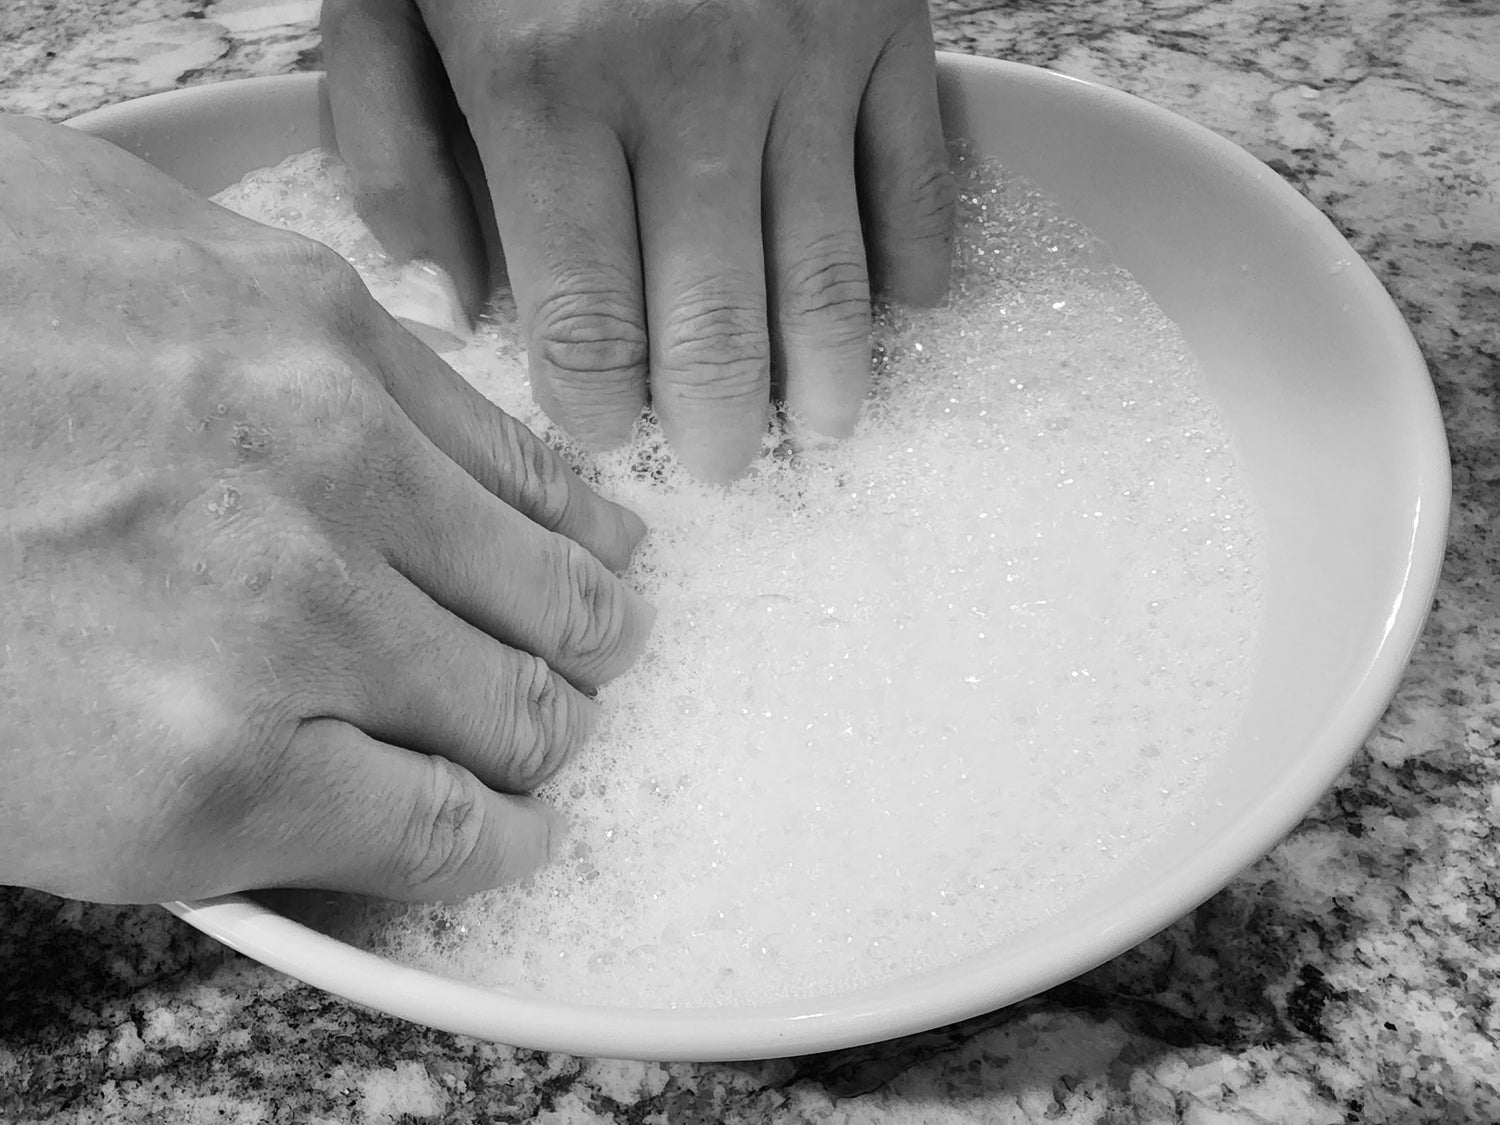 Remove press on nails with soapy hot water, soaking nails in bowl of warm soapy water, press on nail removal